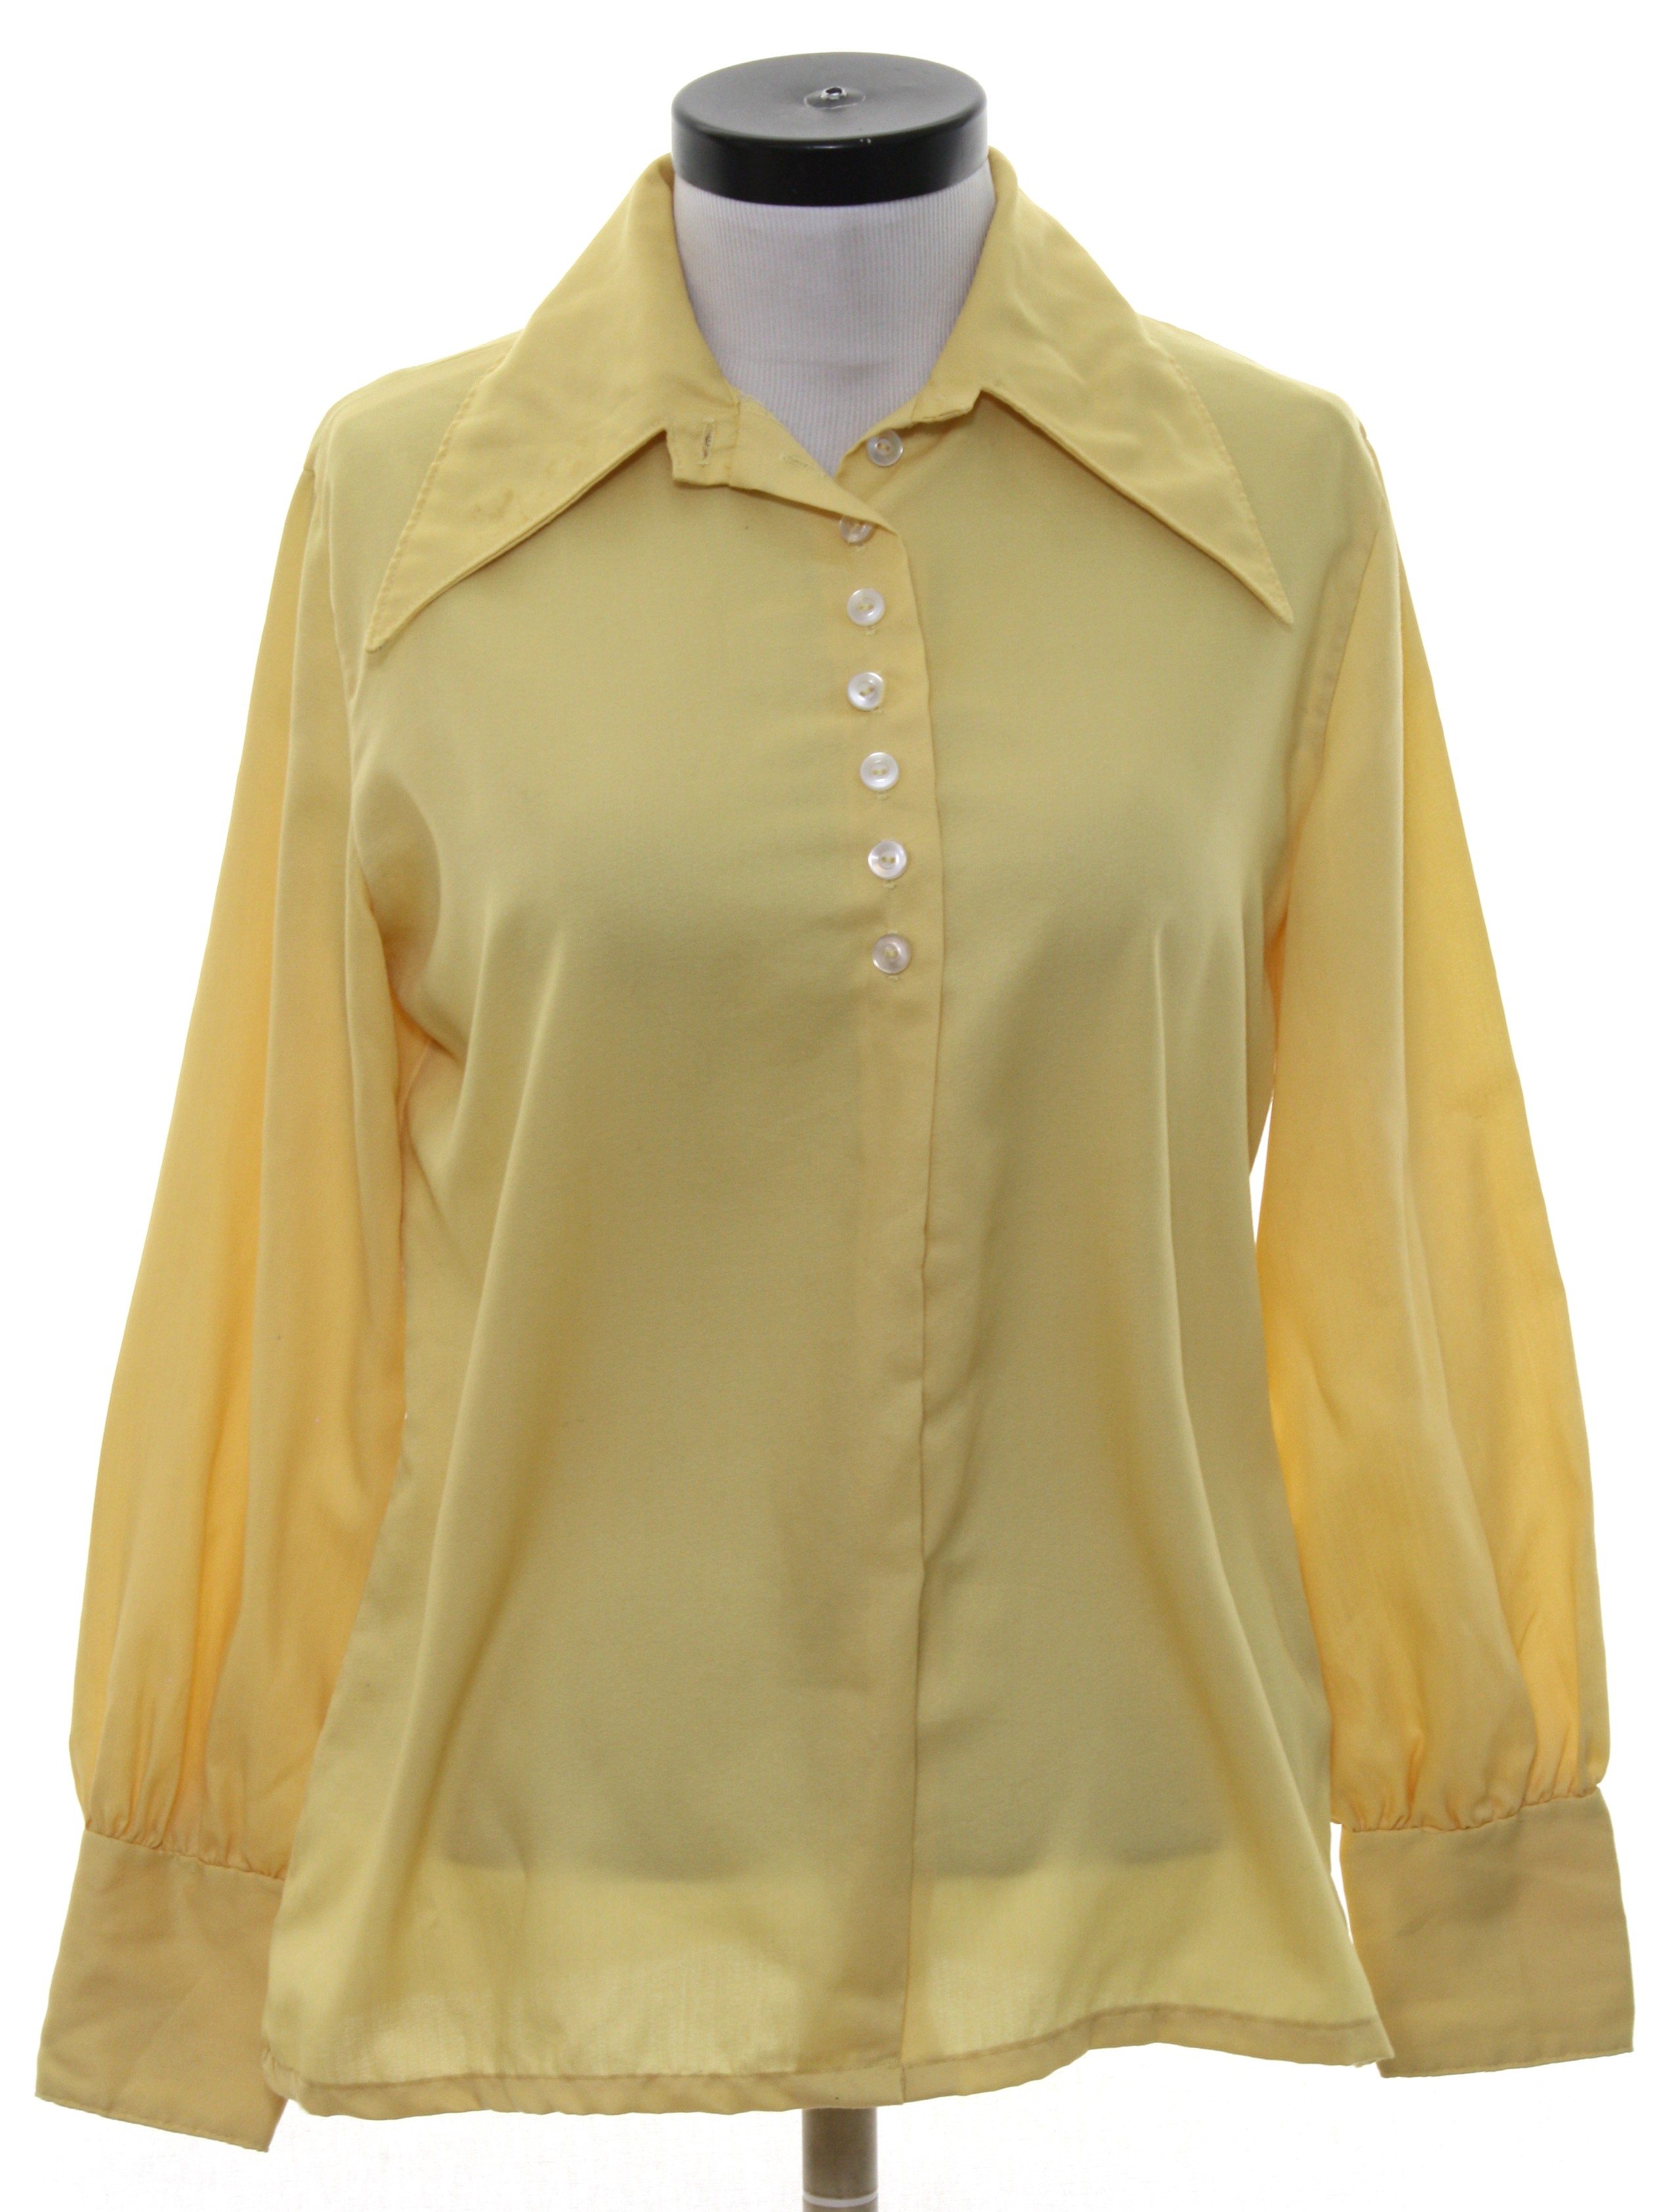 Vintage Shirt Accents 70's Shirt: 70s -Shirt Accents- Womens gold ...